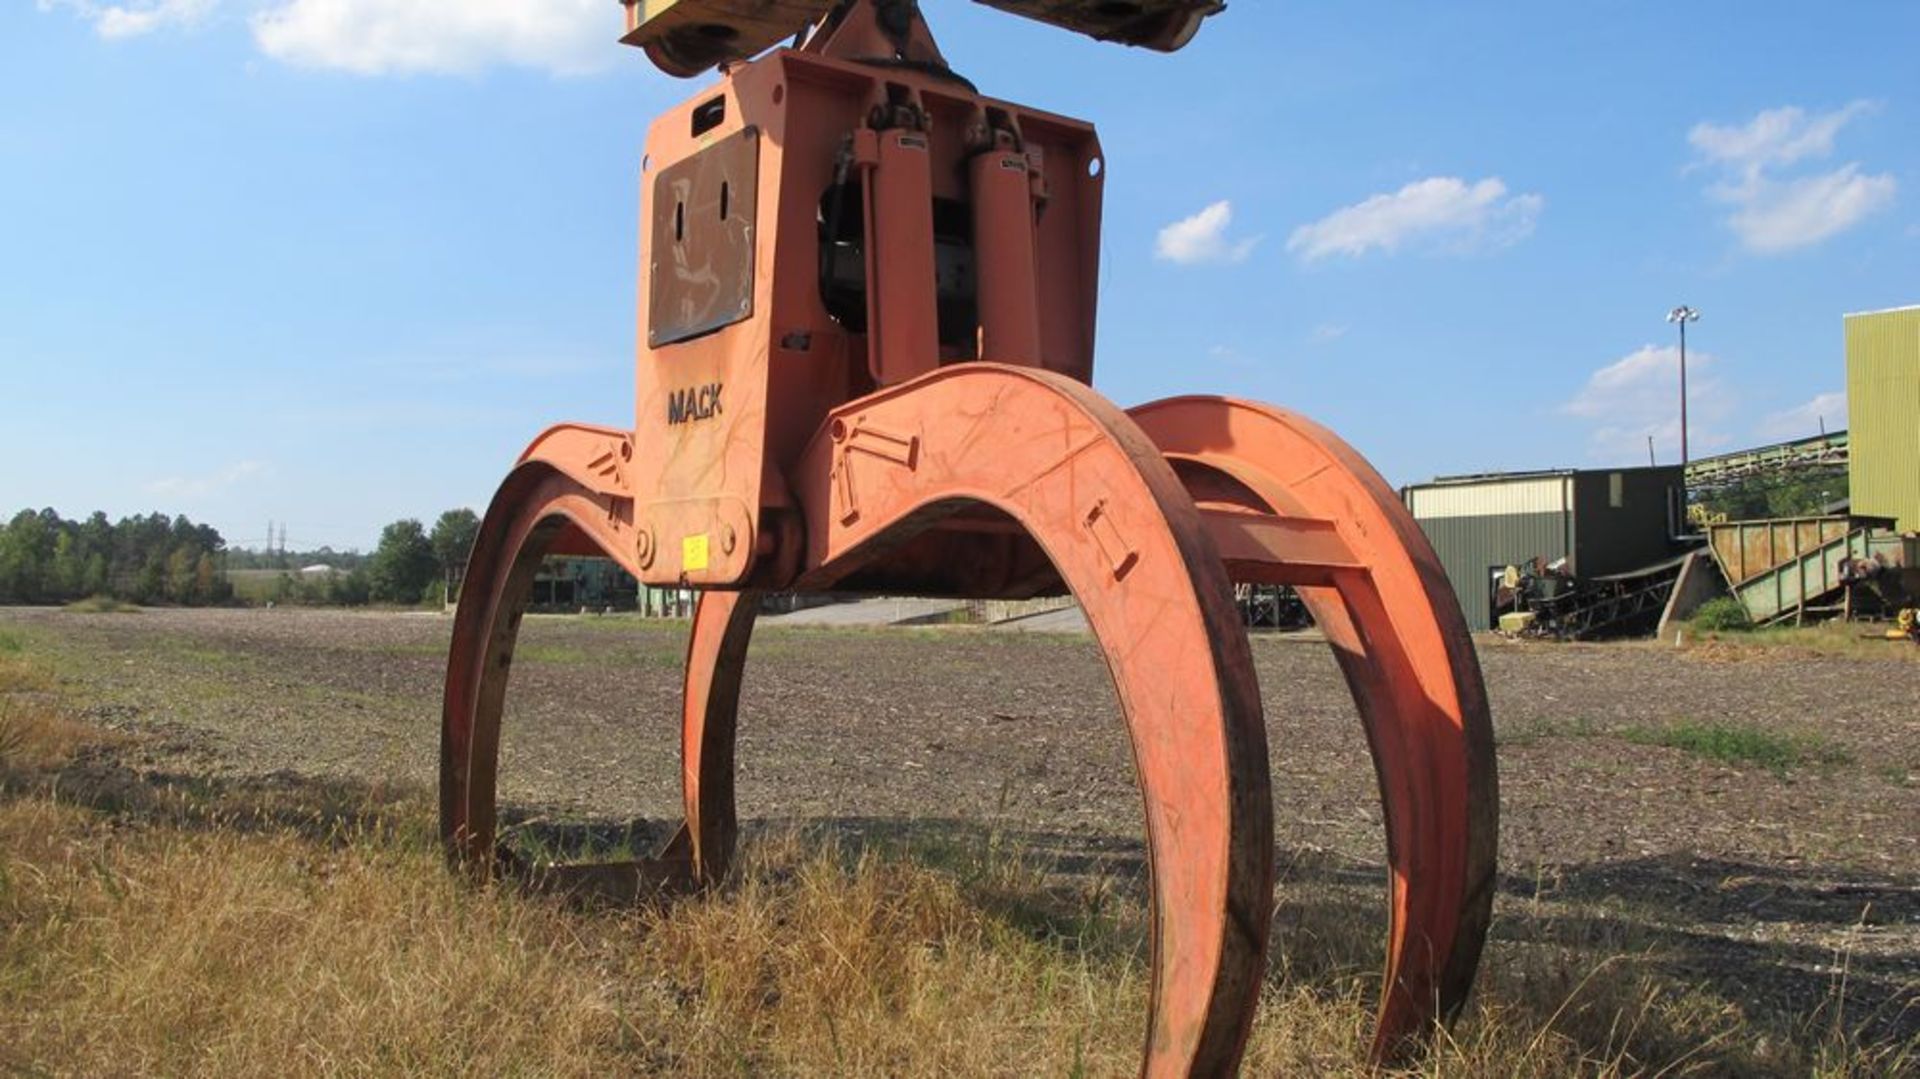 MACK HYDRAULIC GRAPPLE (ON CRANE), APPROX 12' - 16' TALL), (SPARE) APPROX 12' - 16' TALL (WOOD - Image 2 of 2